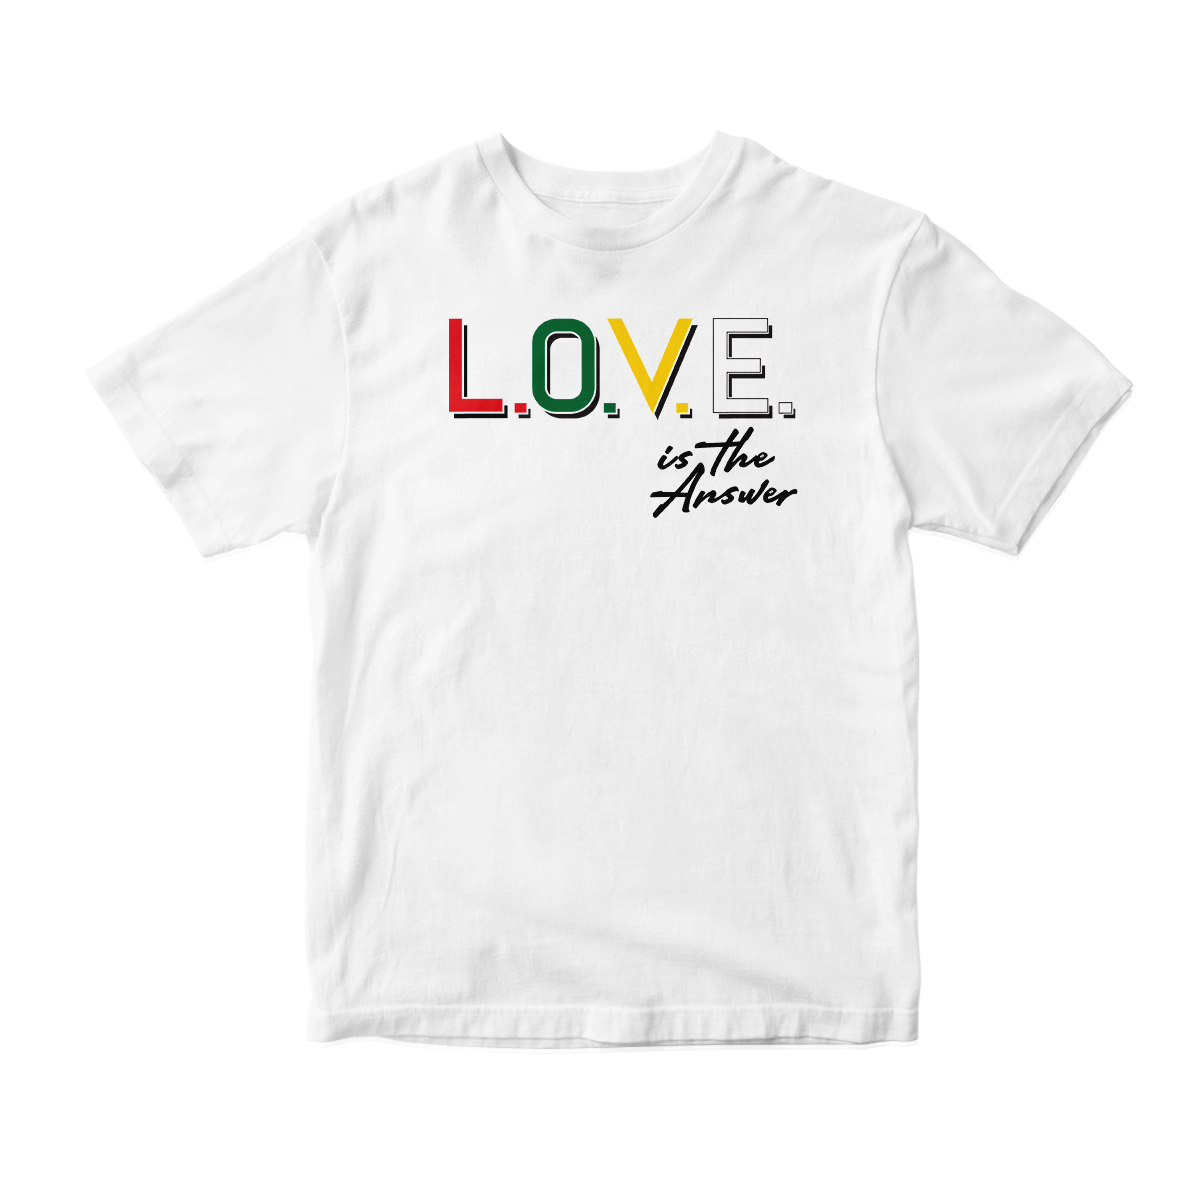 'LOVE Is the Answer' Short Sleeve Tee